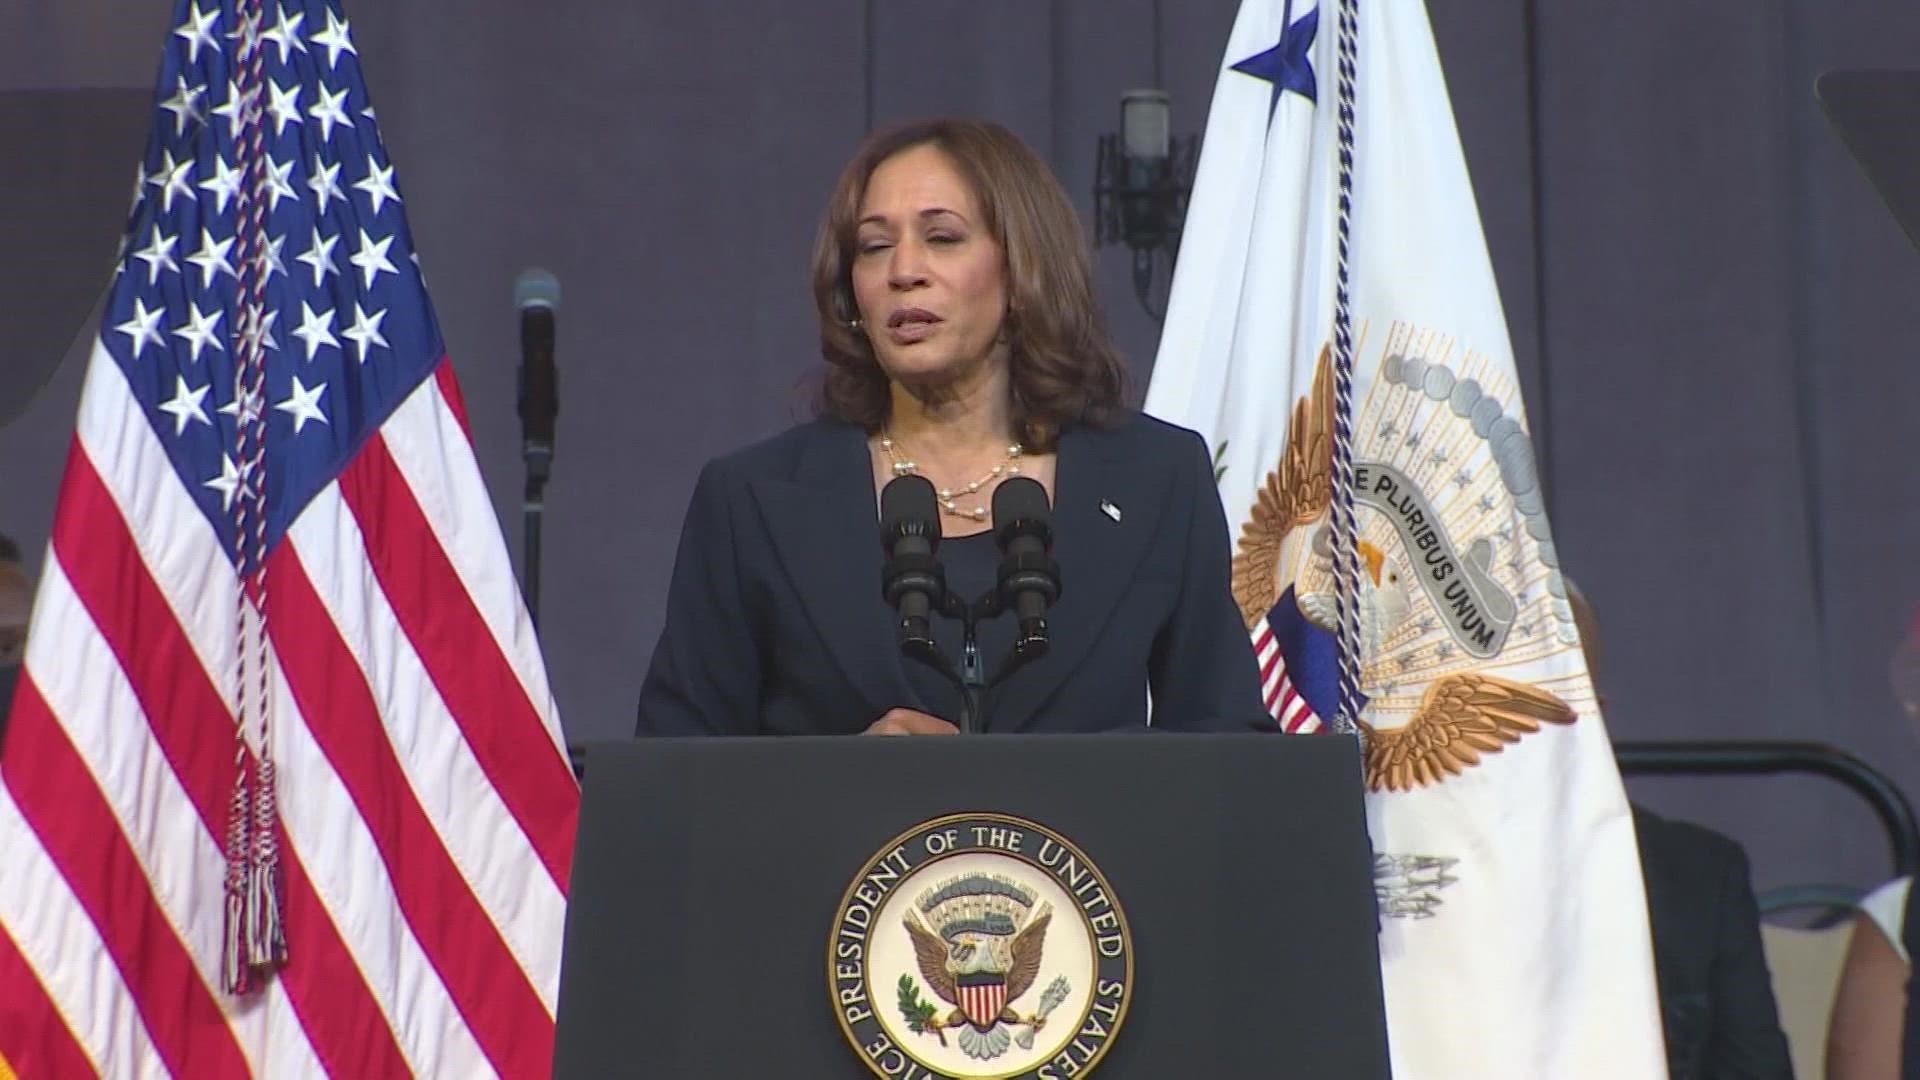 “These are unsettled times and today then I ask on everyone here I ask each one of us to continue to be driven by compassion and optimism," Harris said.